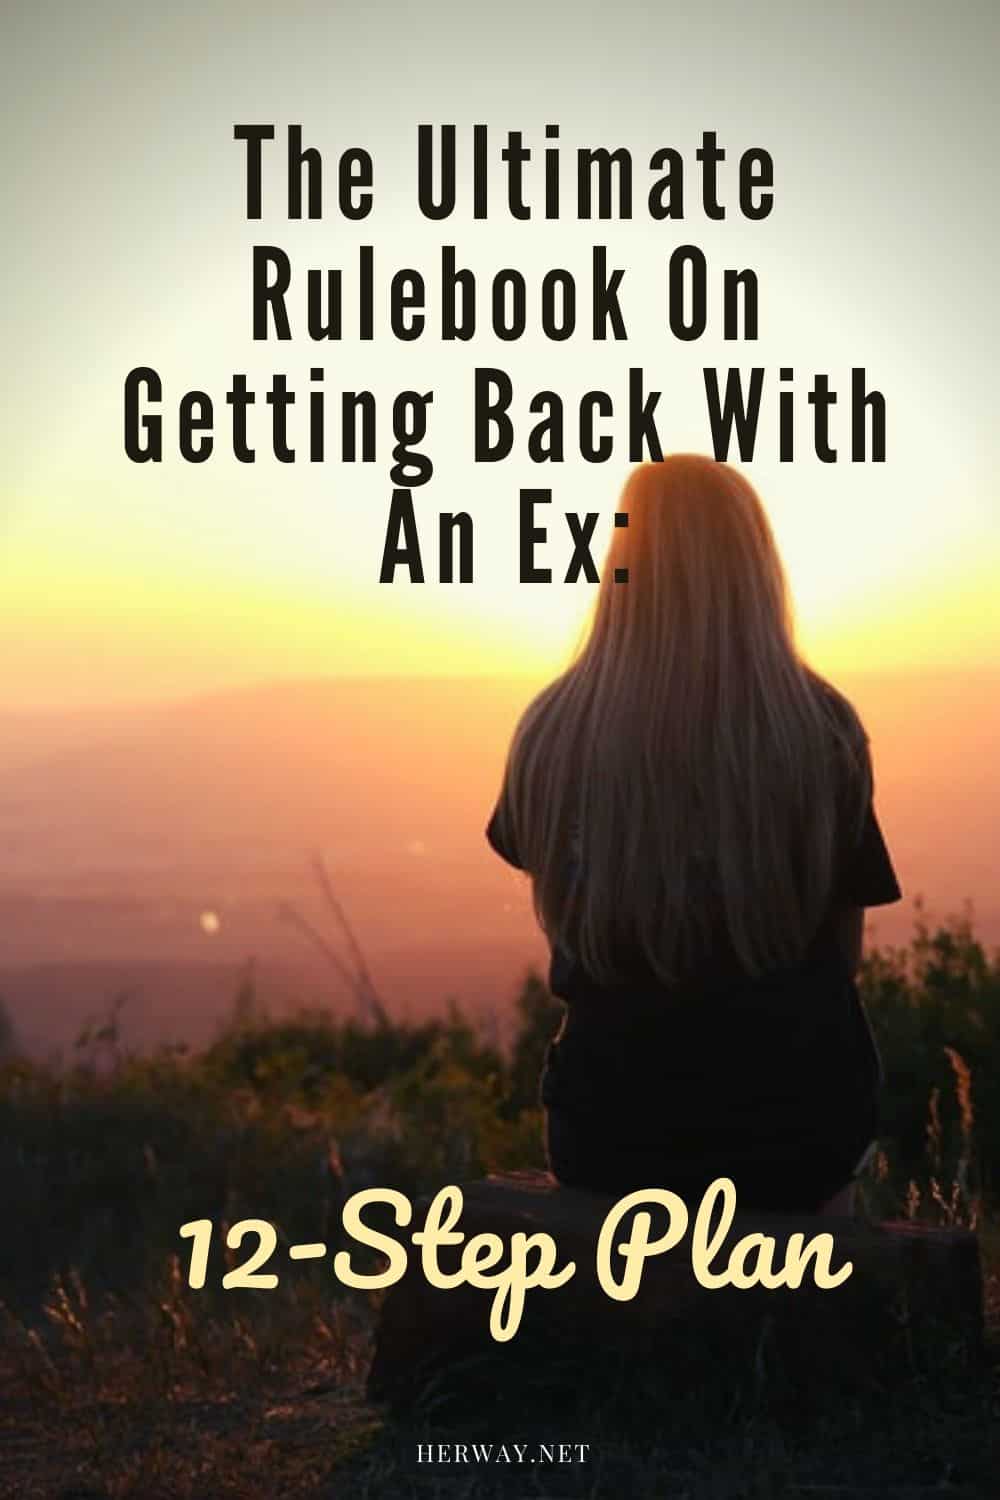 The Ultimate Rulebook On Getting Back With An Ex: 12-Step Plan